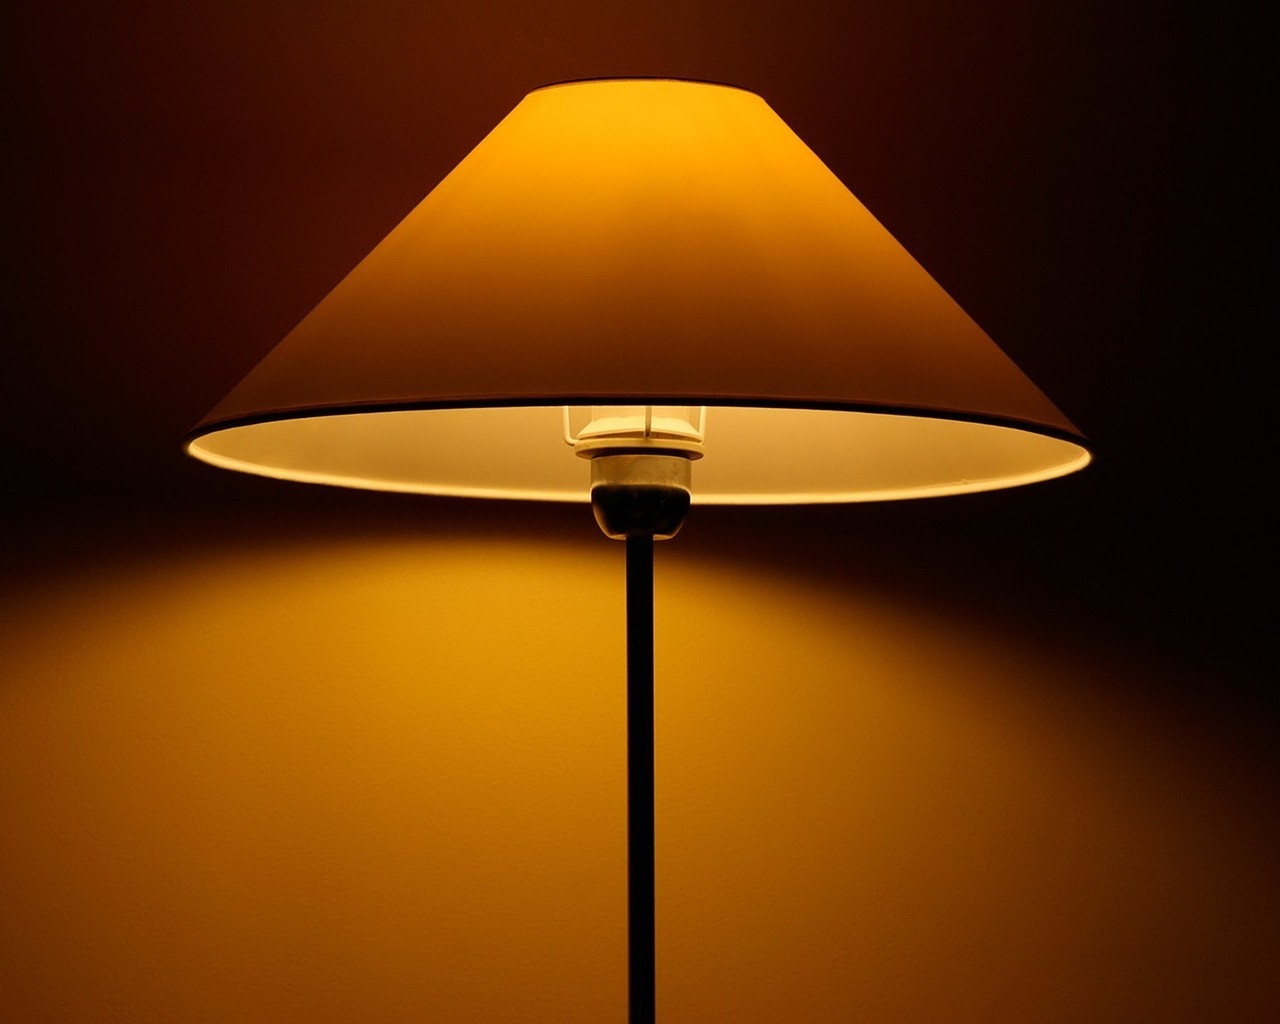 Lighted Lamp for 1280 x 1024 resolution